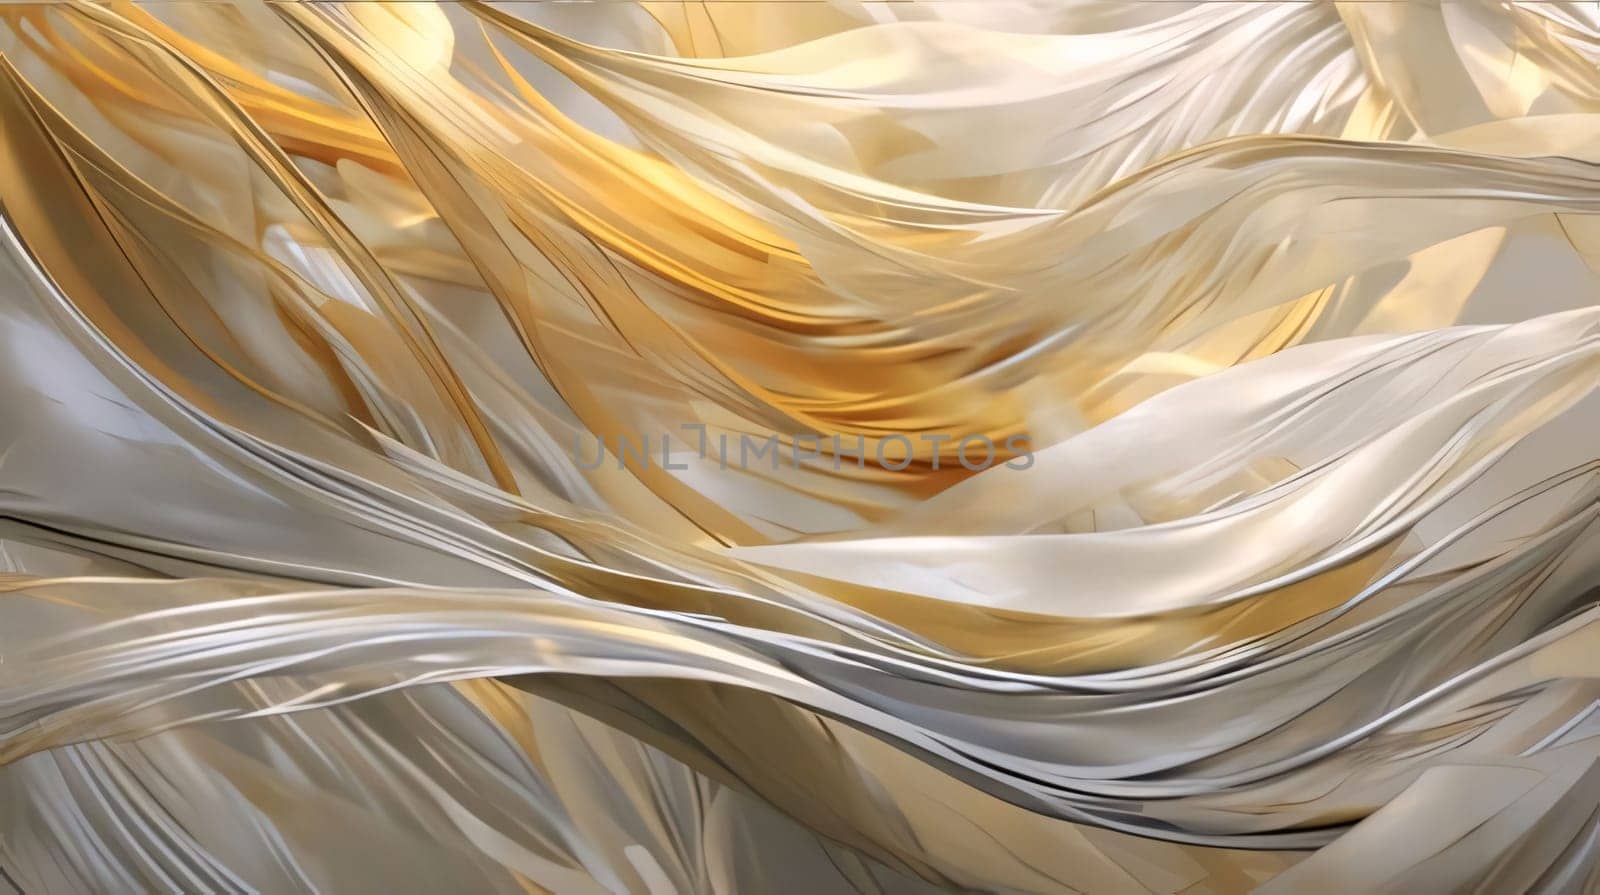 Abstract background design: 3d rendering, abstract background with metallic waves, computer generated images